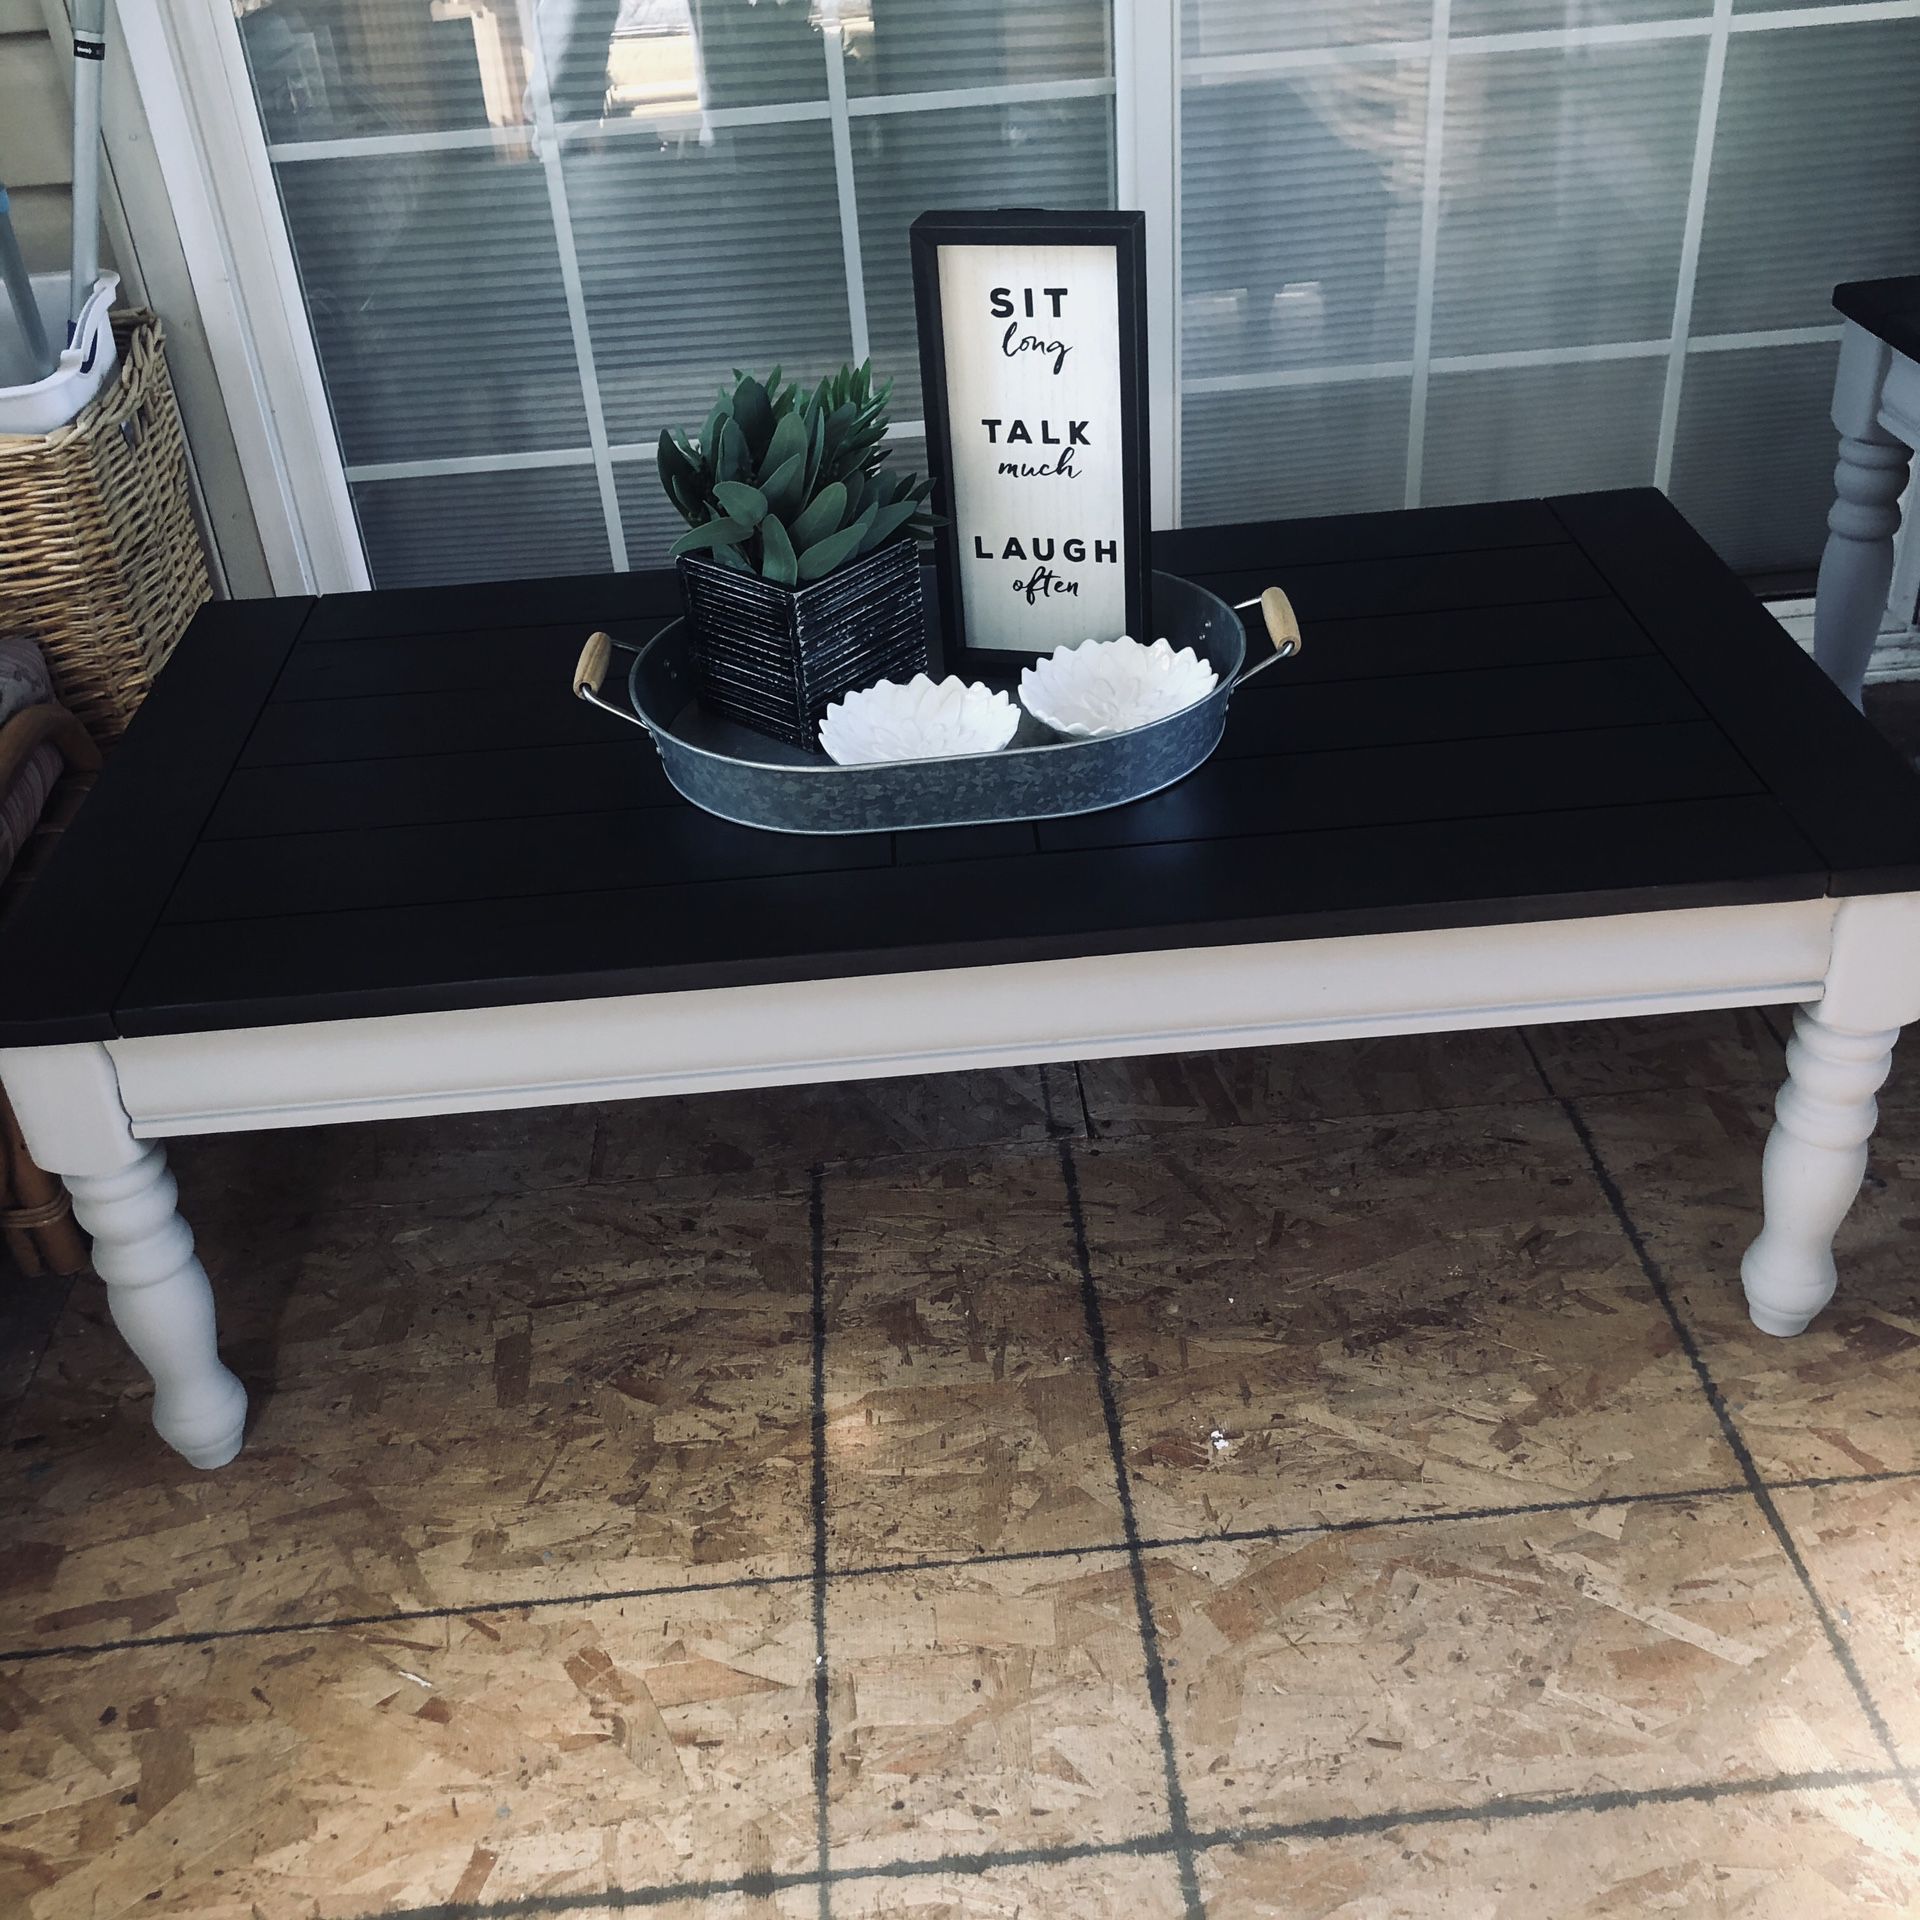 Coffee Table and End Tables